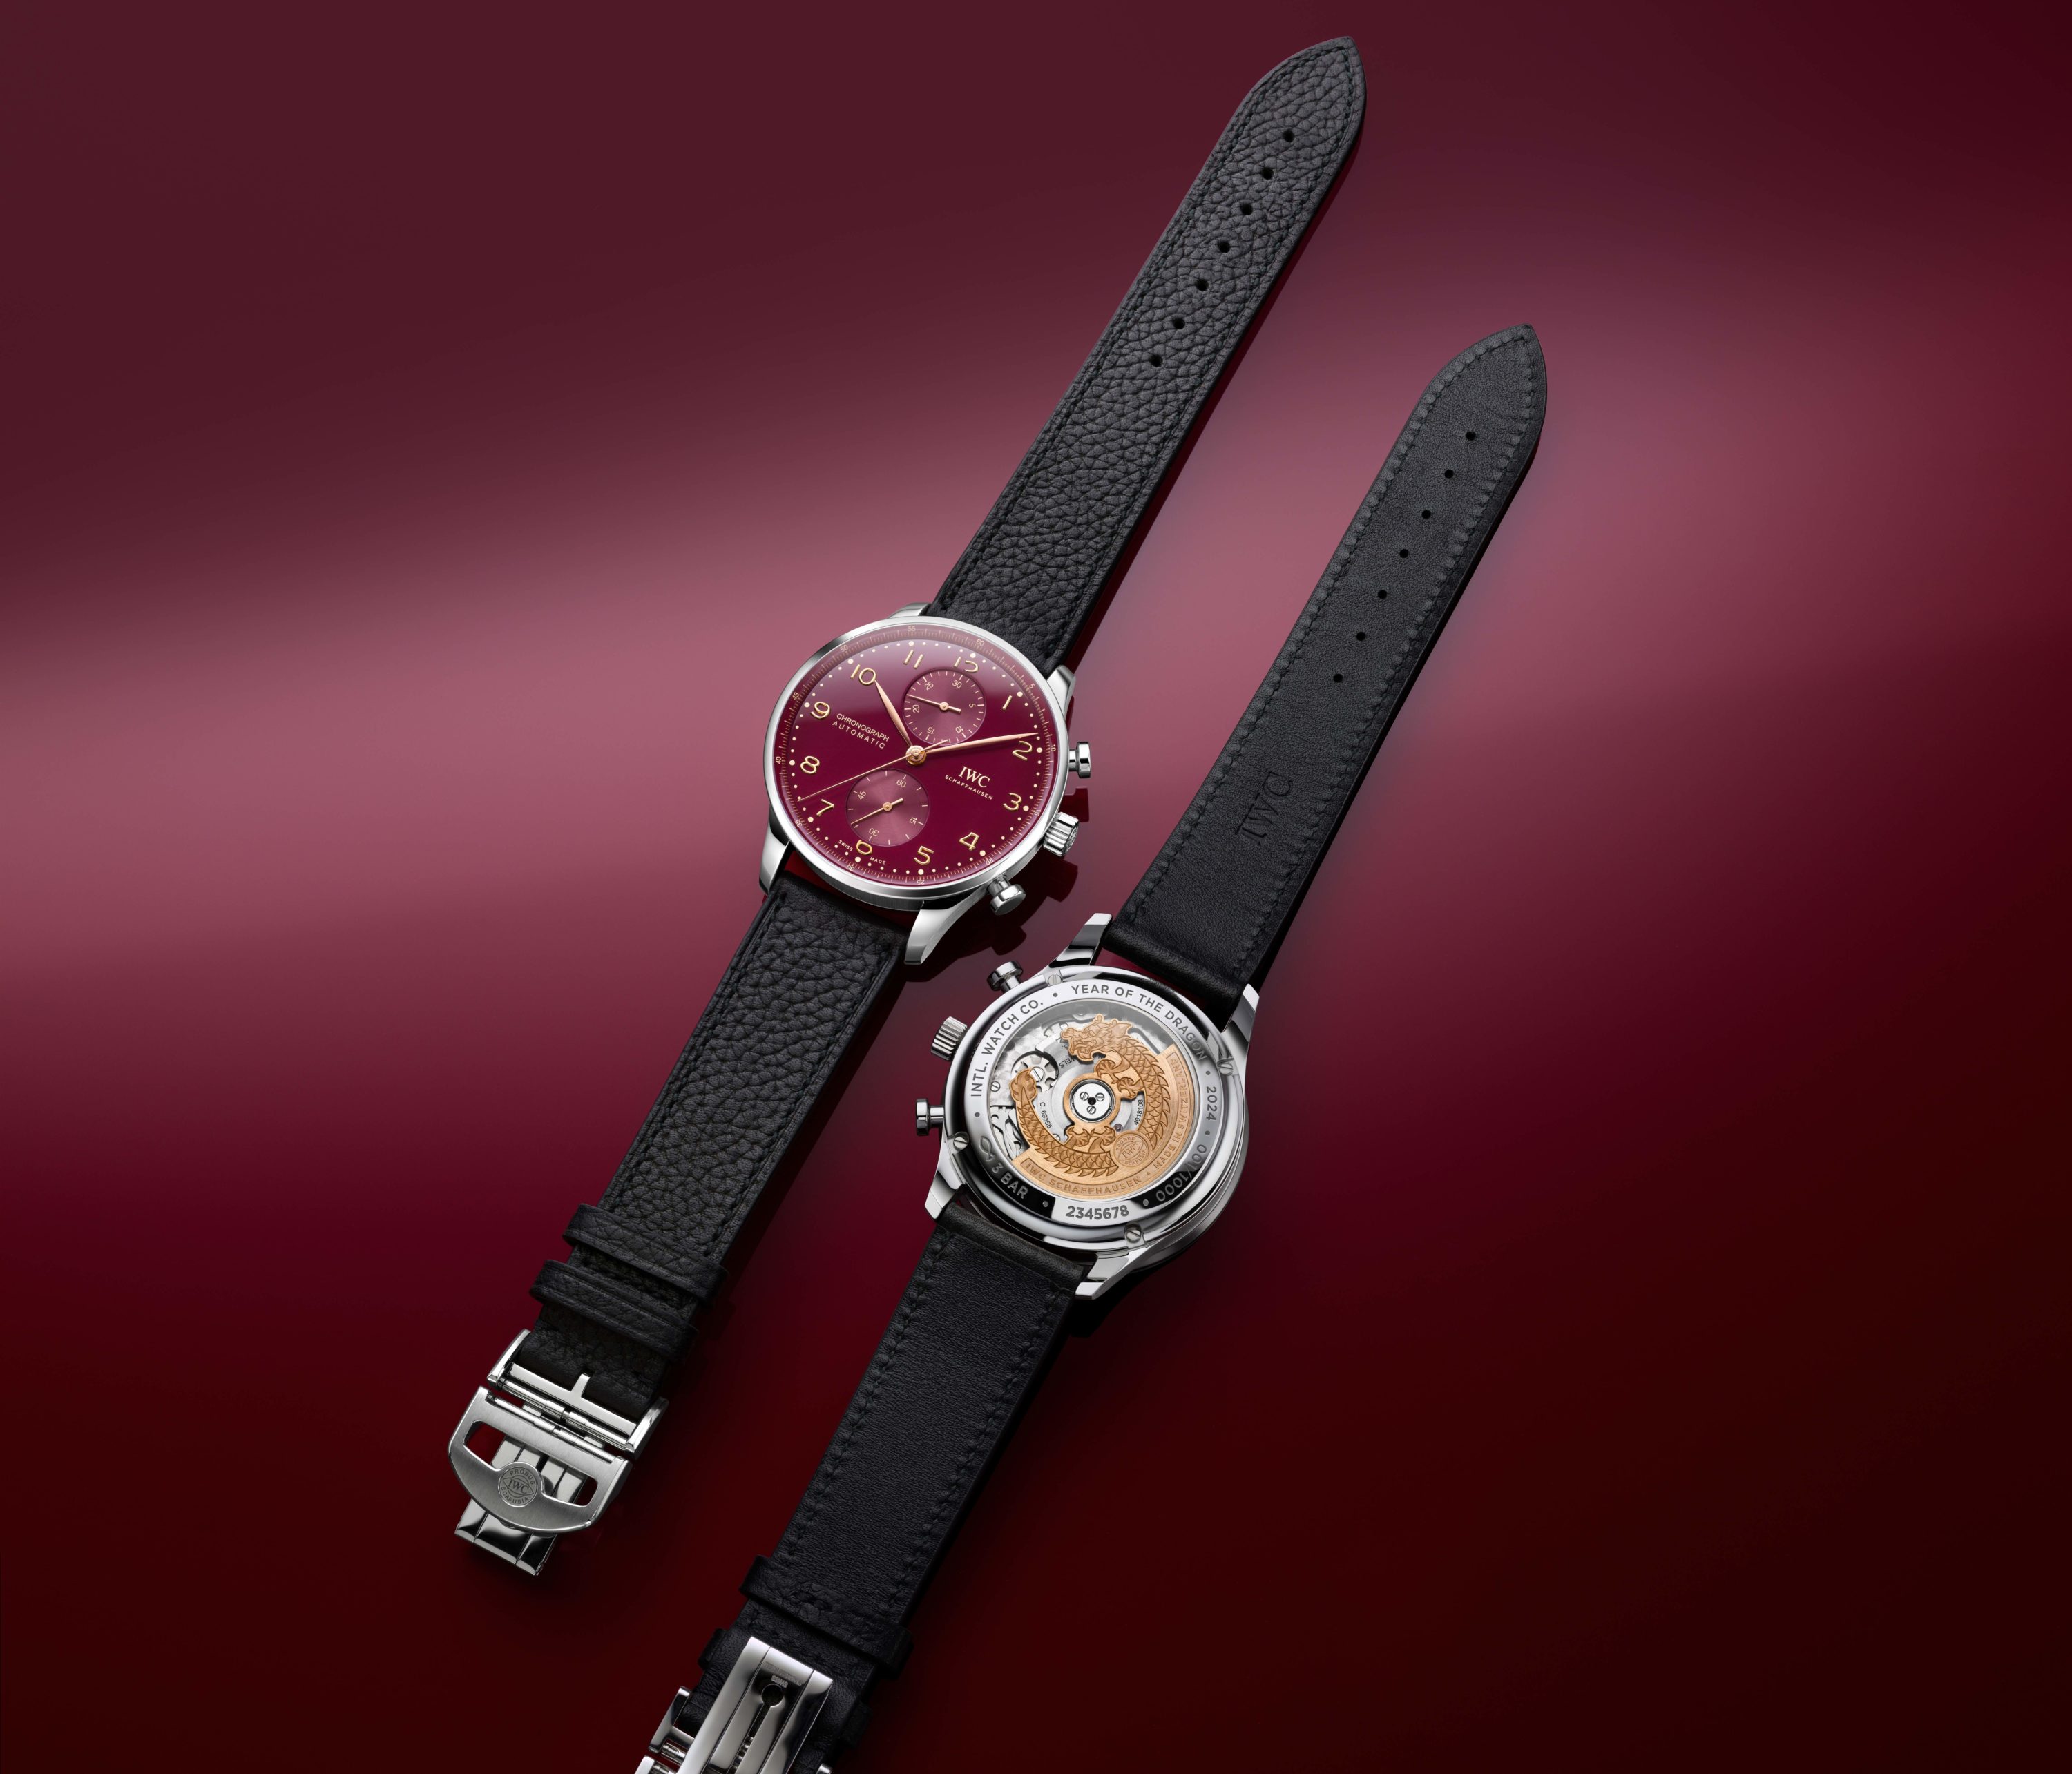 IWC Honors the Chinese Year of the Dragon with Limited Portugieser Chronograph with Burgundy Dial